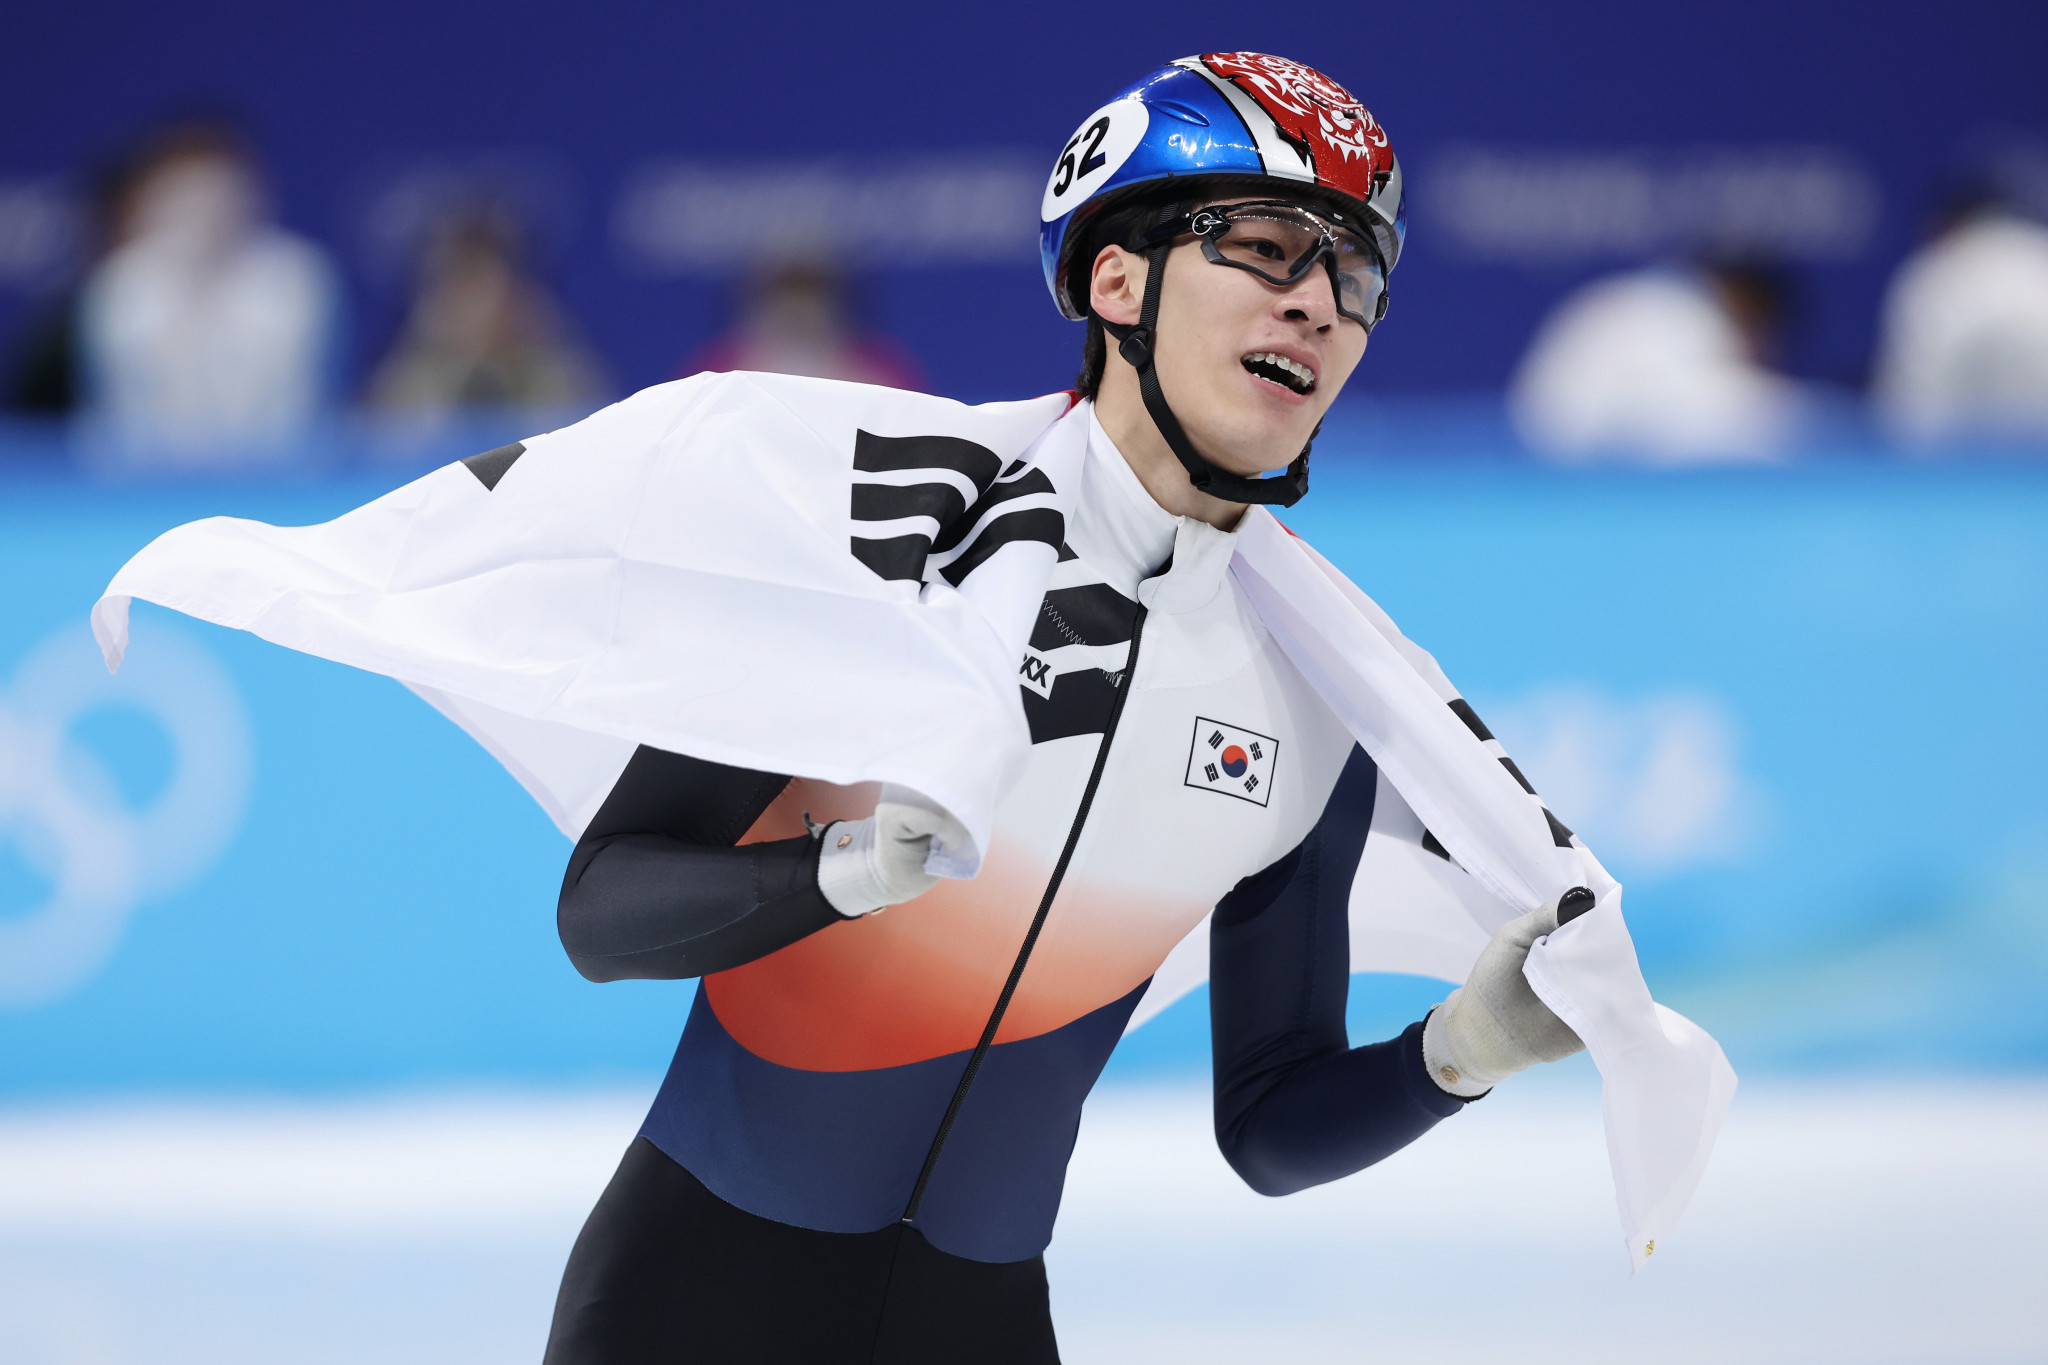 Hwang puts disqualification behind him to earn South Korea's first gold of Beijing 2022